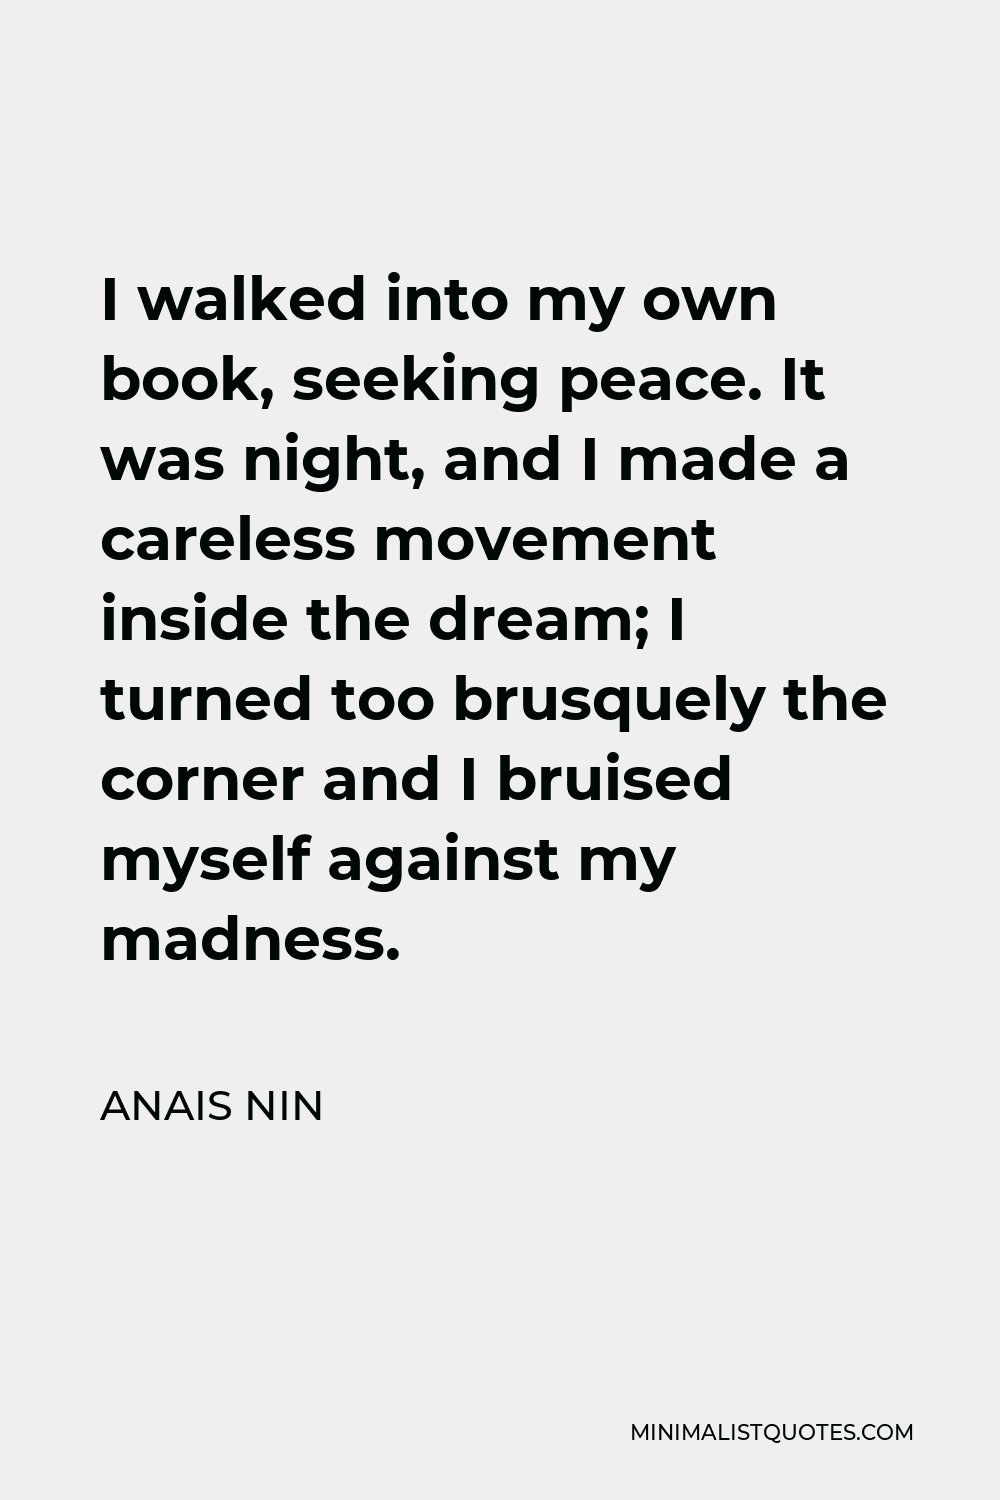 Anais Nin Quote - I walked into my own book, seeking peace. It was night, and I made a careless movement inside the dream; I turned too brusquely the corner and I bruised myself against my madness.